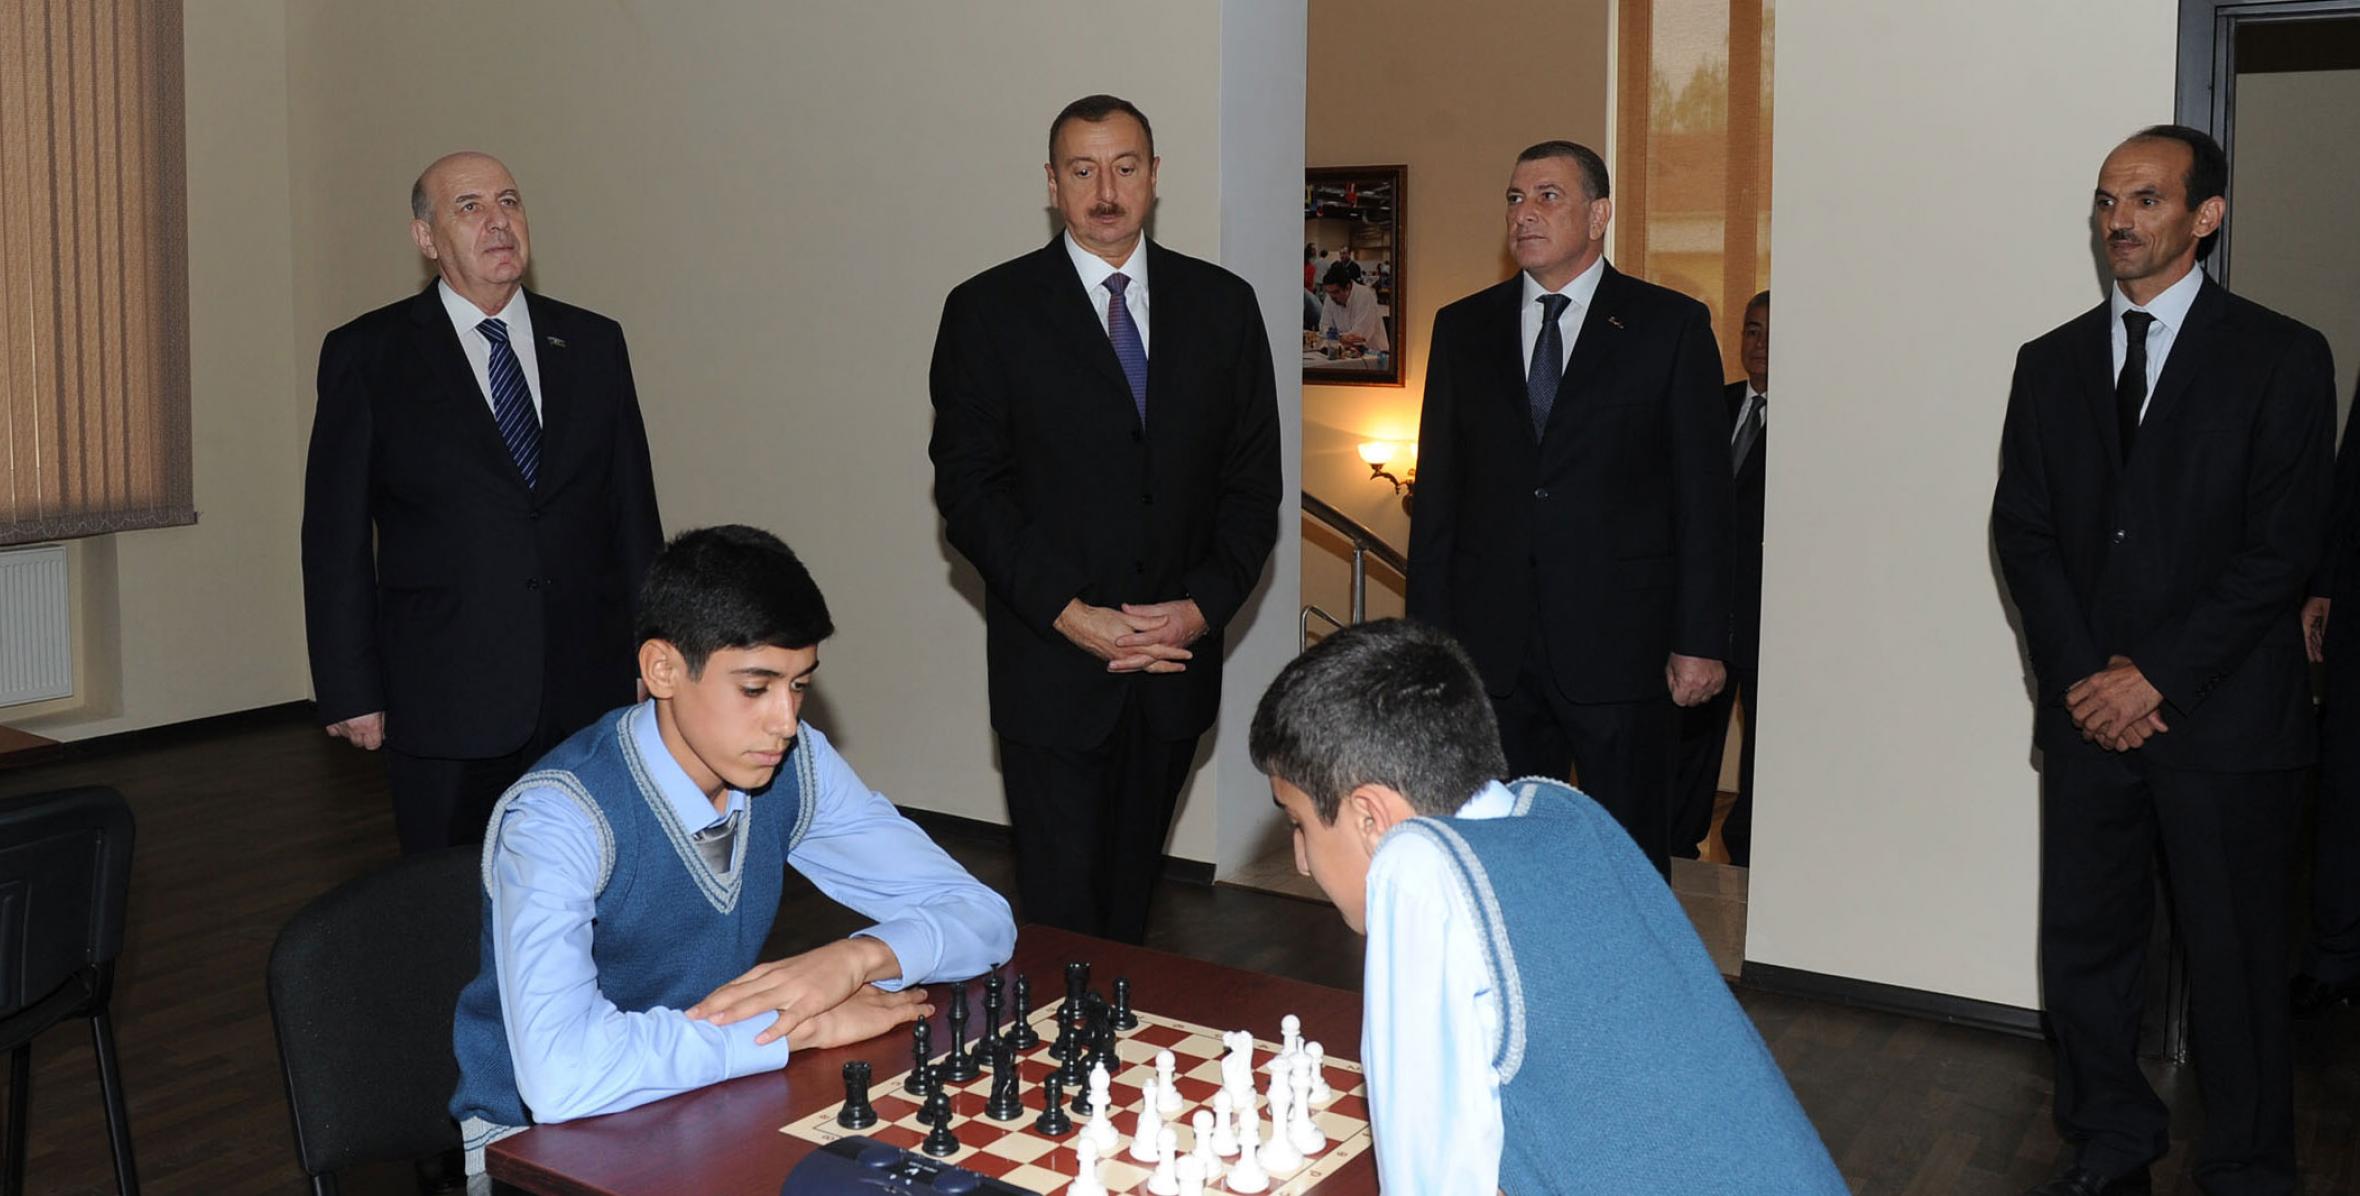 Ilham Aliyev attended the opening of a Chess School in Saatli